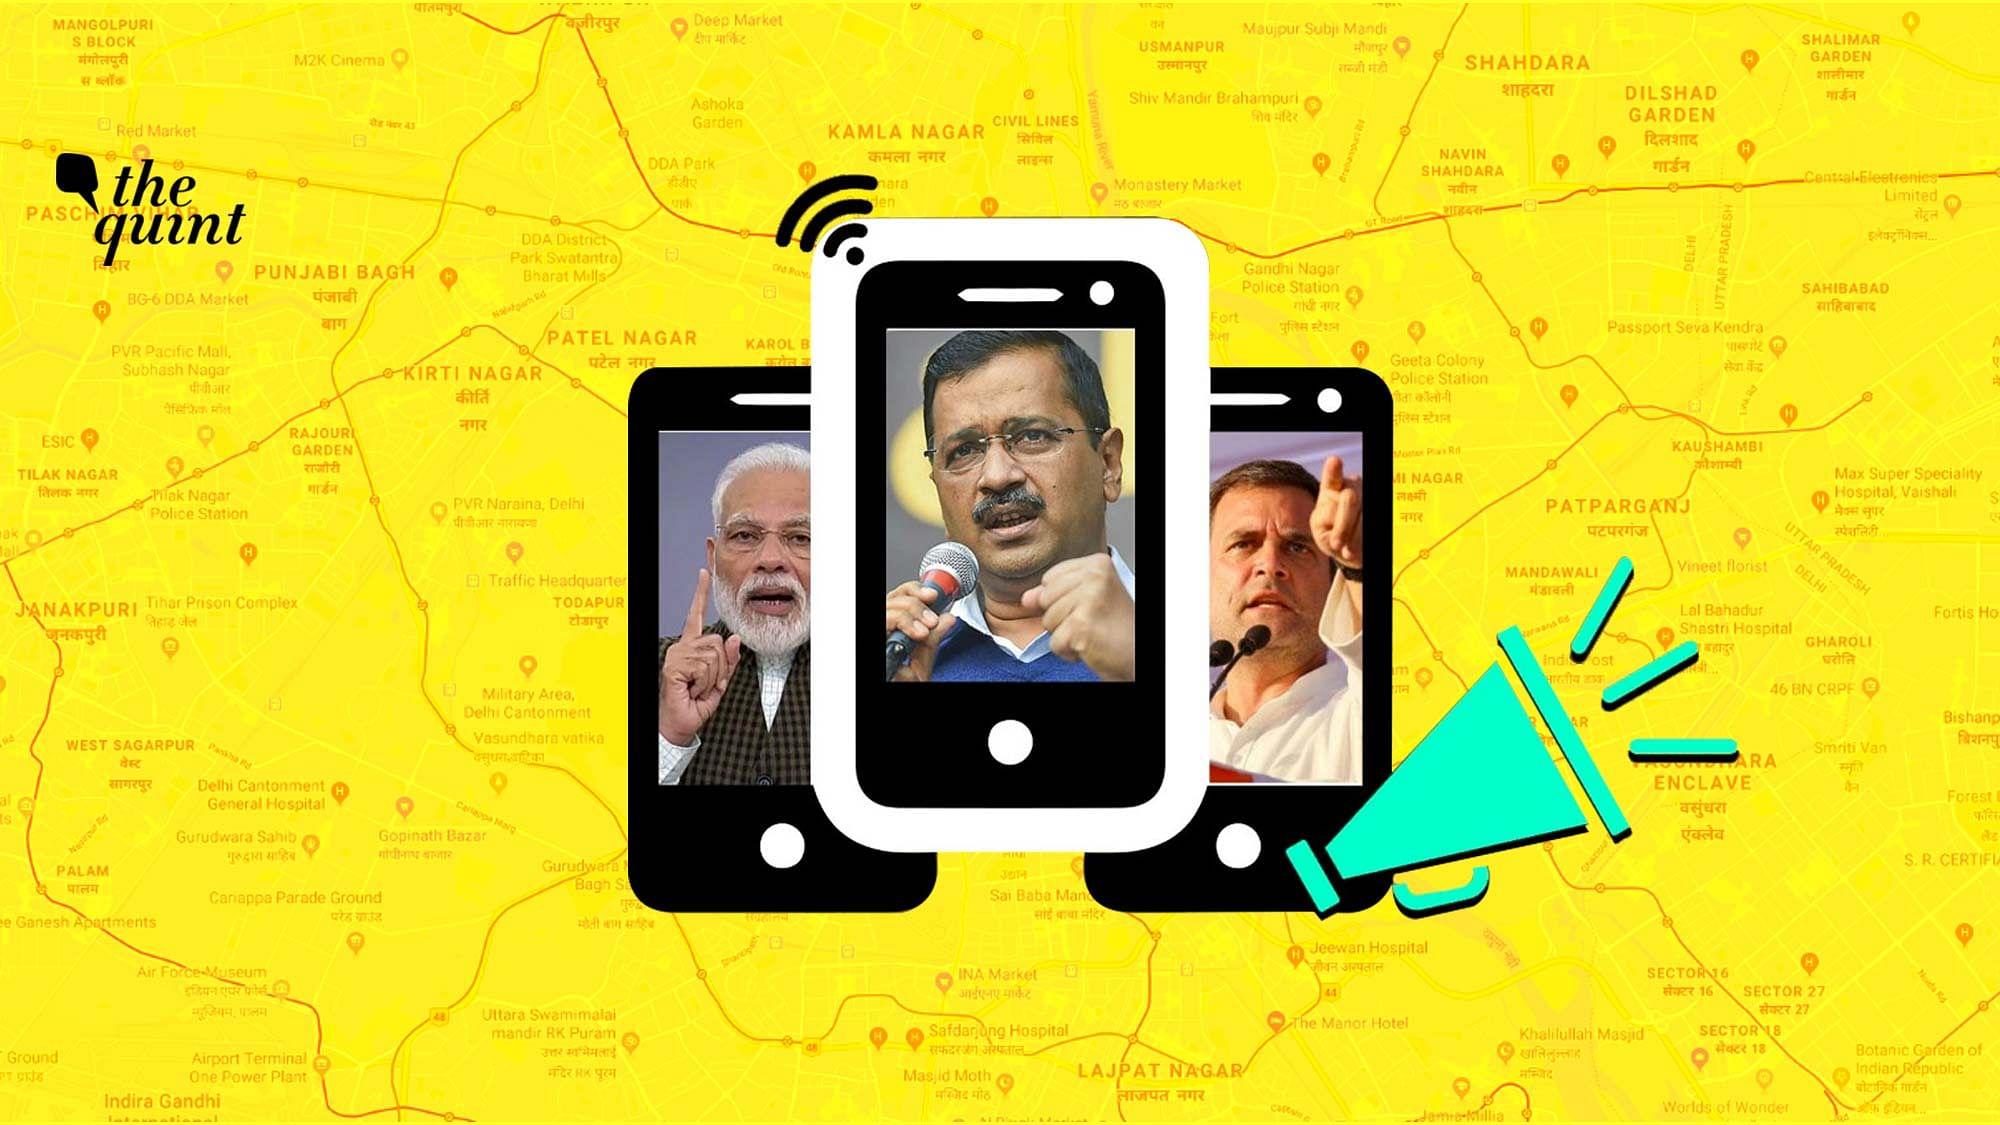 Delhi Elections 2020: Between 21 December 2019 and 19 January, parties and candidates have spent over Rs 60 lakh on political ads on Facebook.